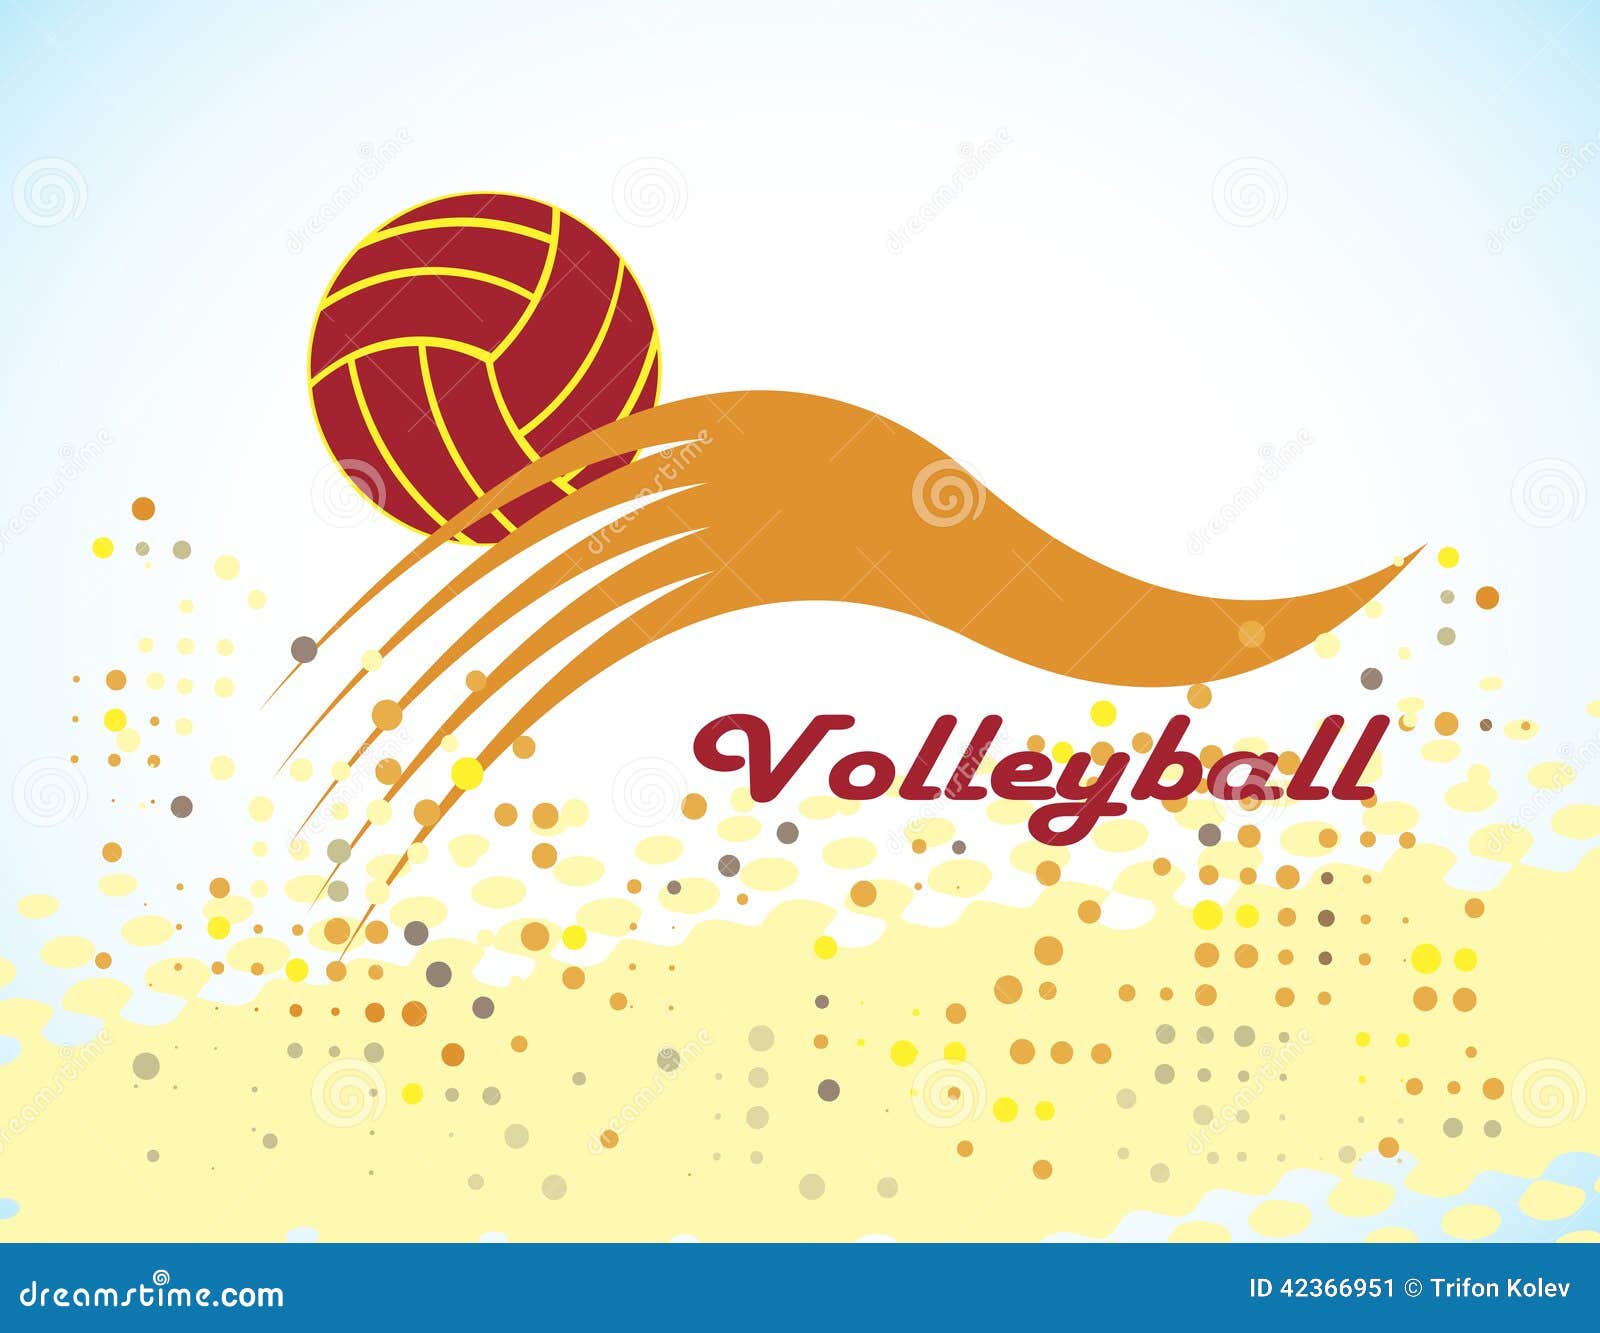 Volleyball stock vector. Illustration of hand, athletic - 42366951